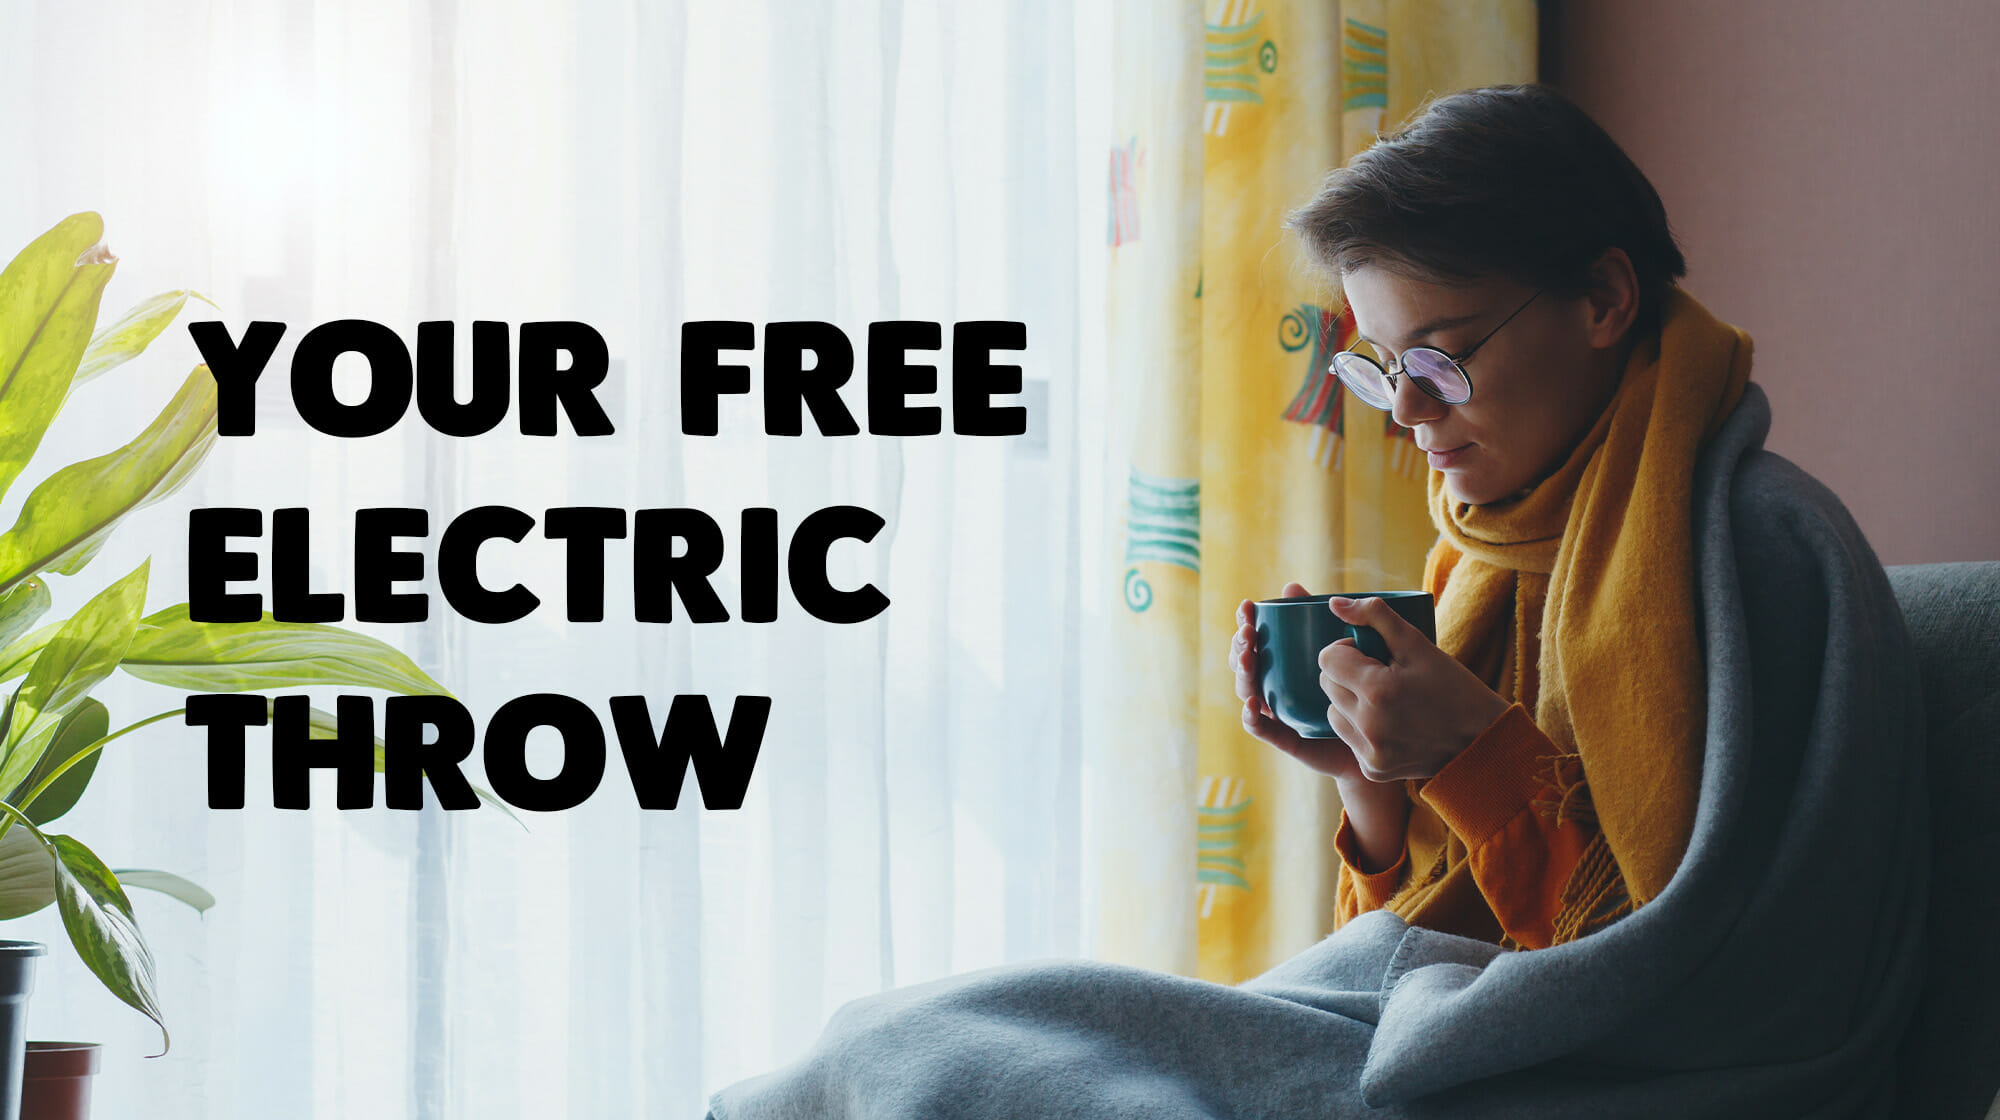 Electric Throw scheme hailed a success Featured Image